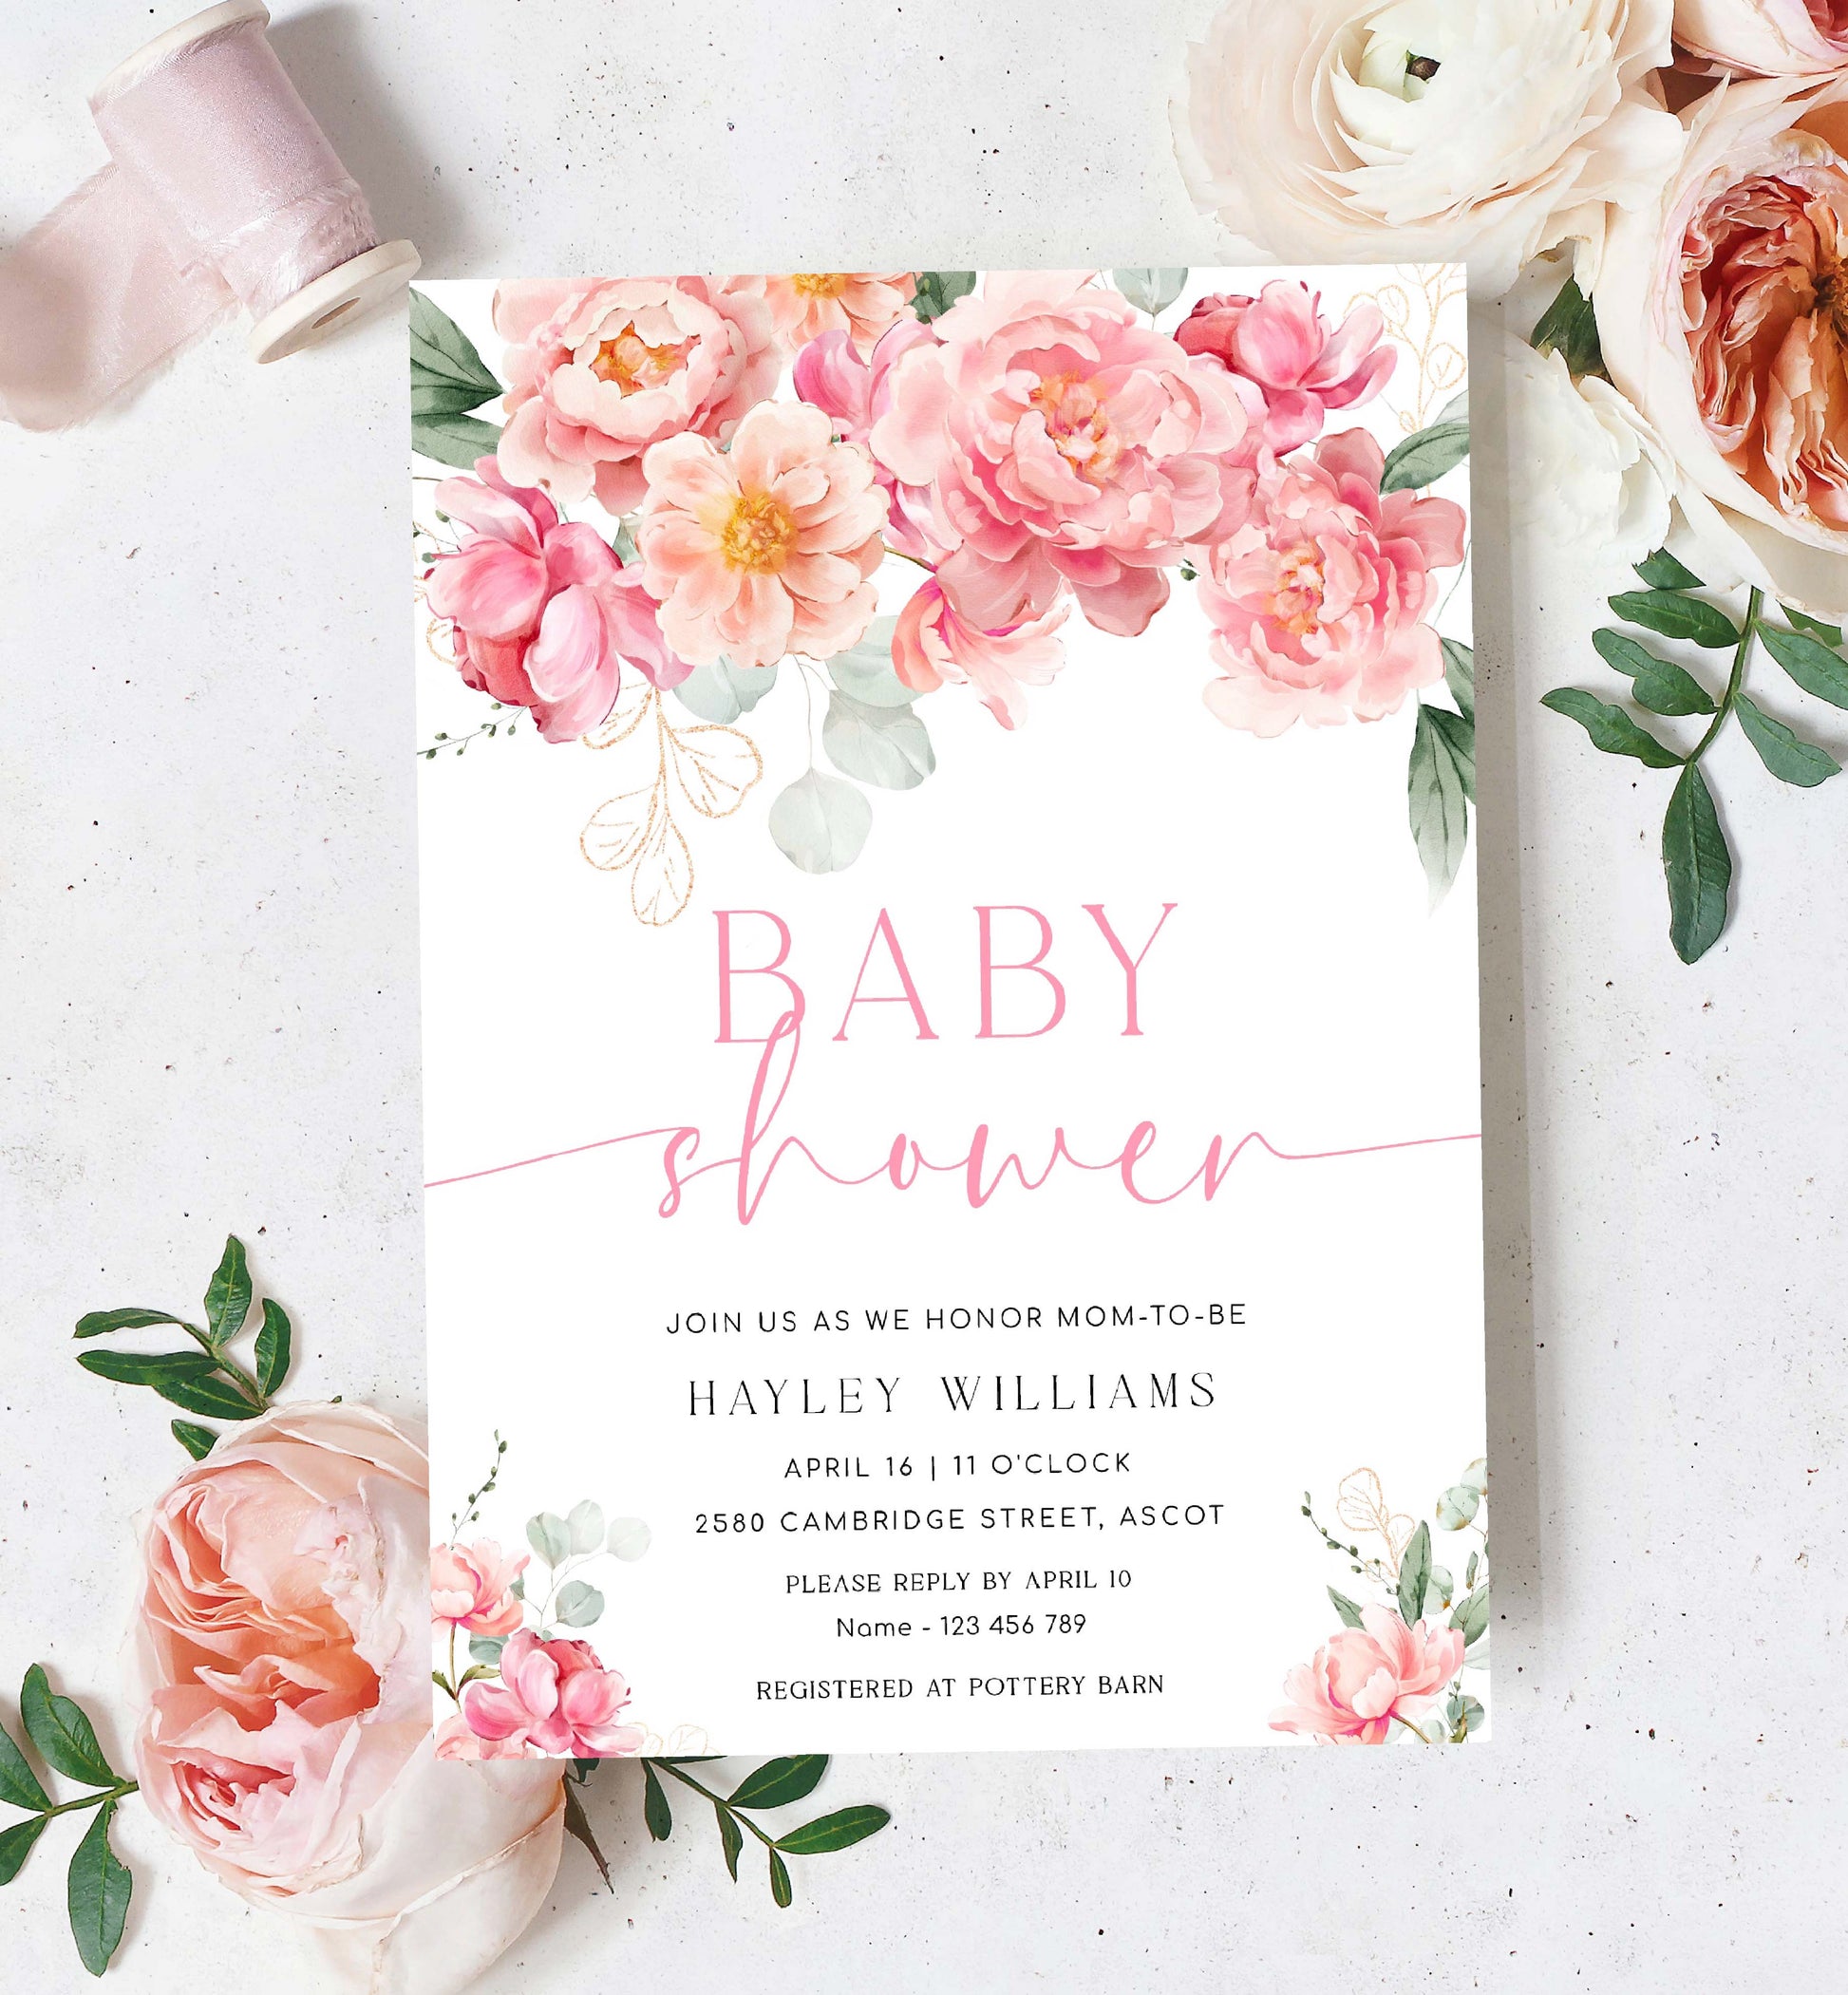 Printable Baby Shower Invitation, Book Request, Raffle Ticket, Details Card, Hot Pink Peony, Spring Floral Girl Baby Shower Evite, Piper